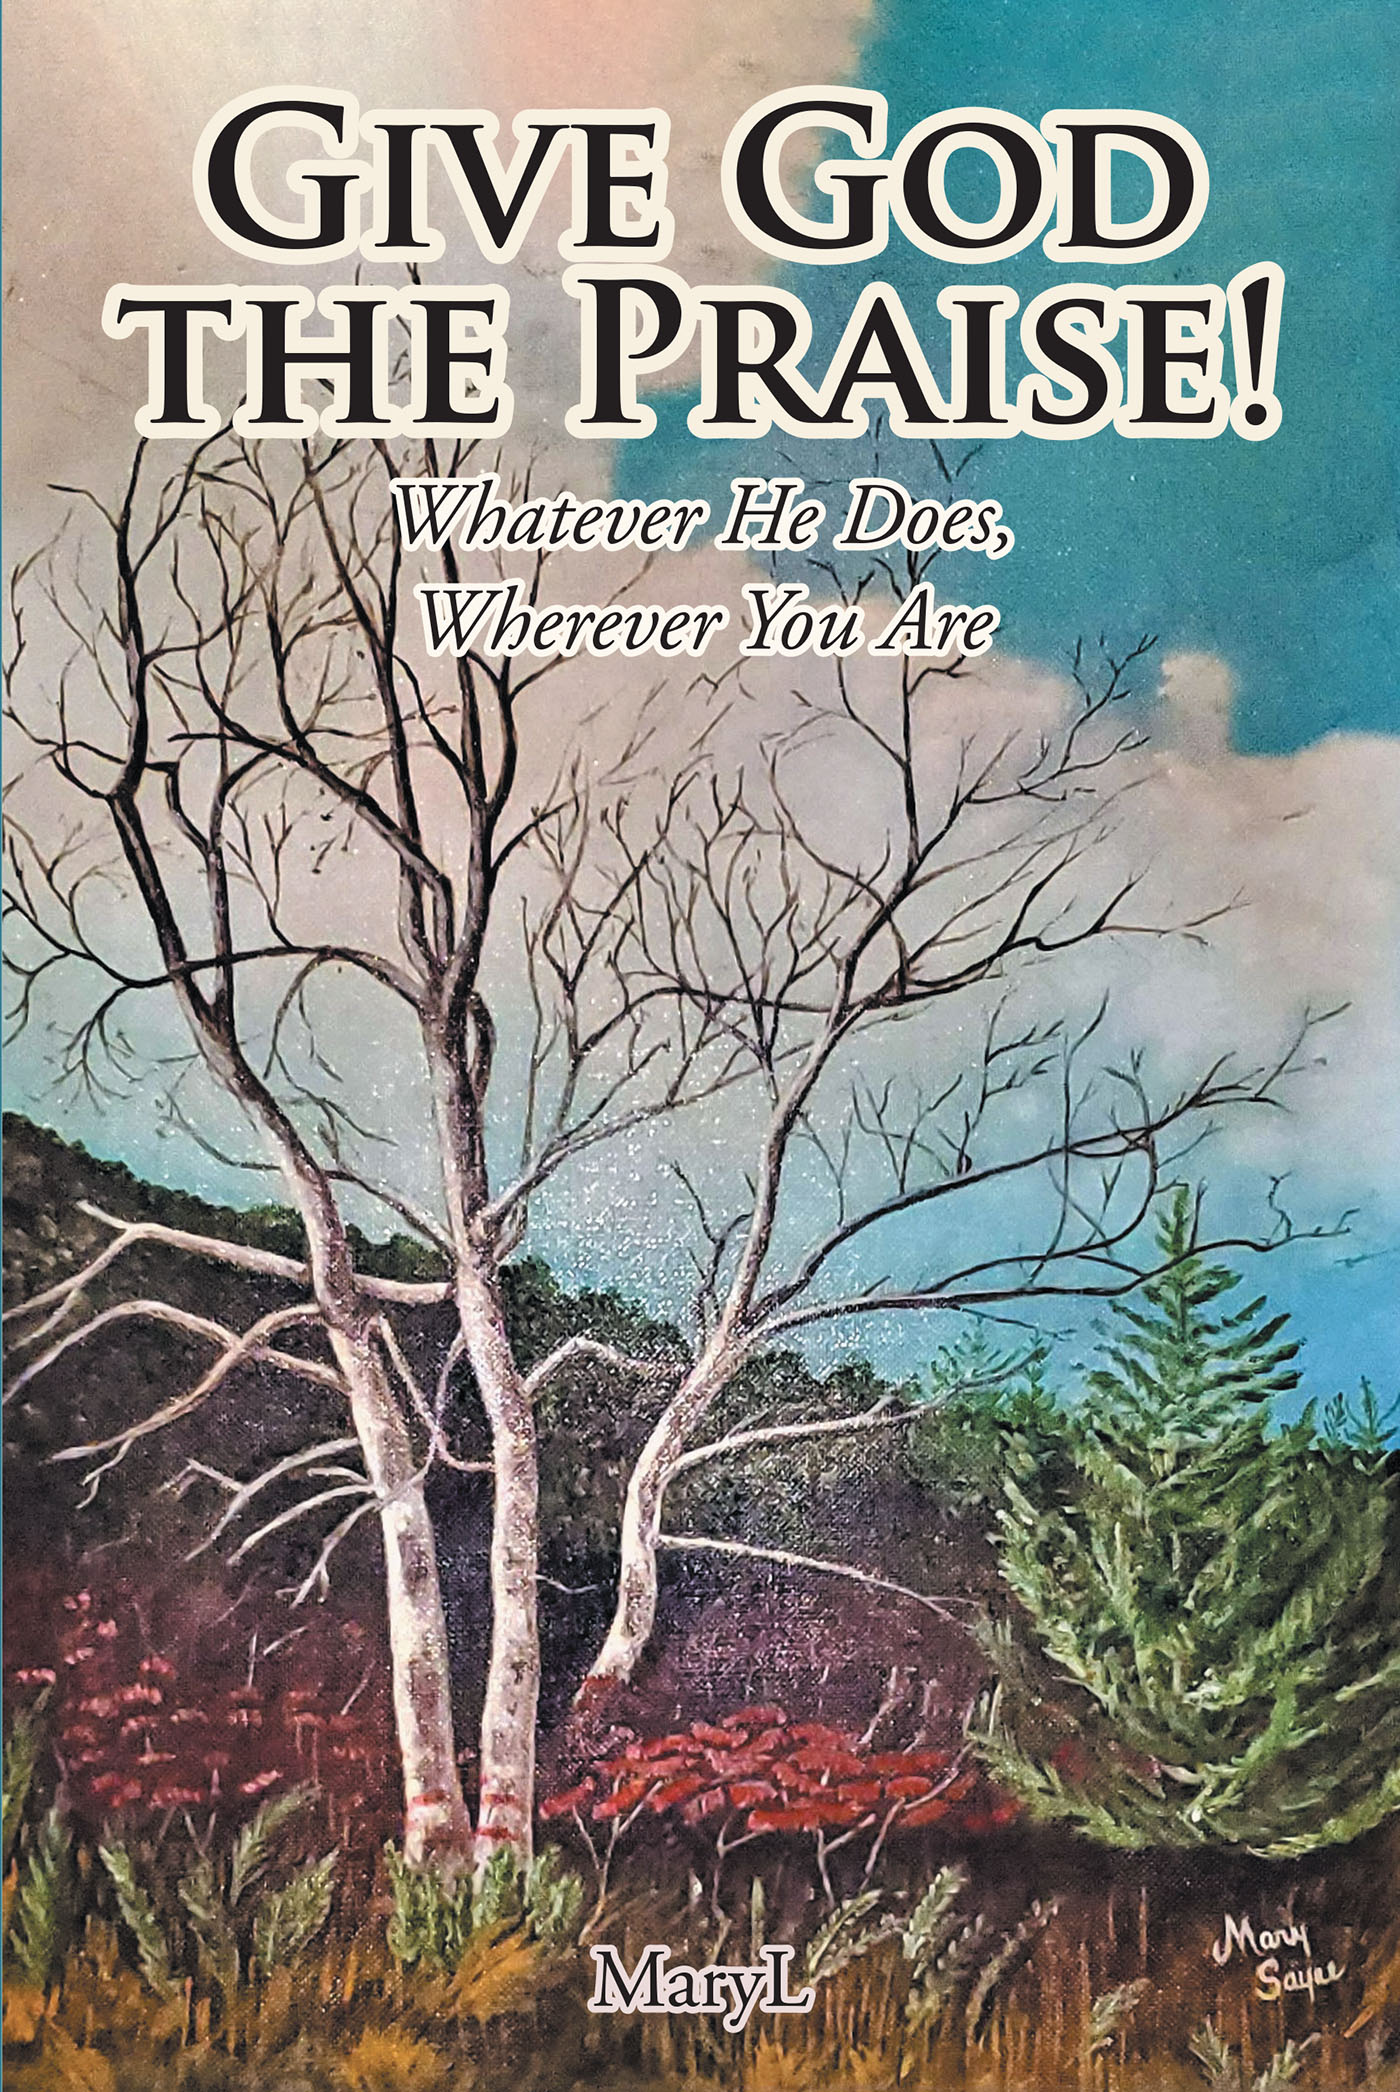 Author Mary L’s New Book, "Give God the Praise! Whatever He Does, Wherever You Are," is a Beautiful Assortment of the Author’s Own Godly Miracles and Original Poetry